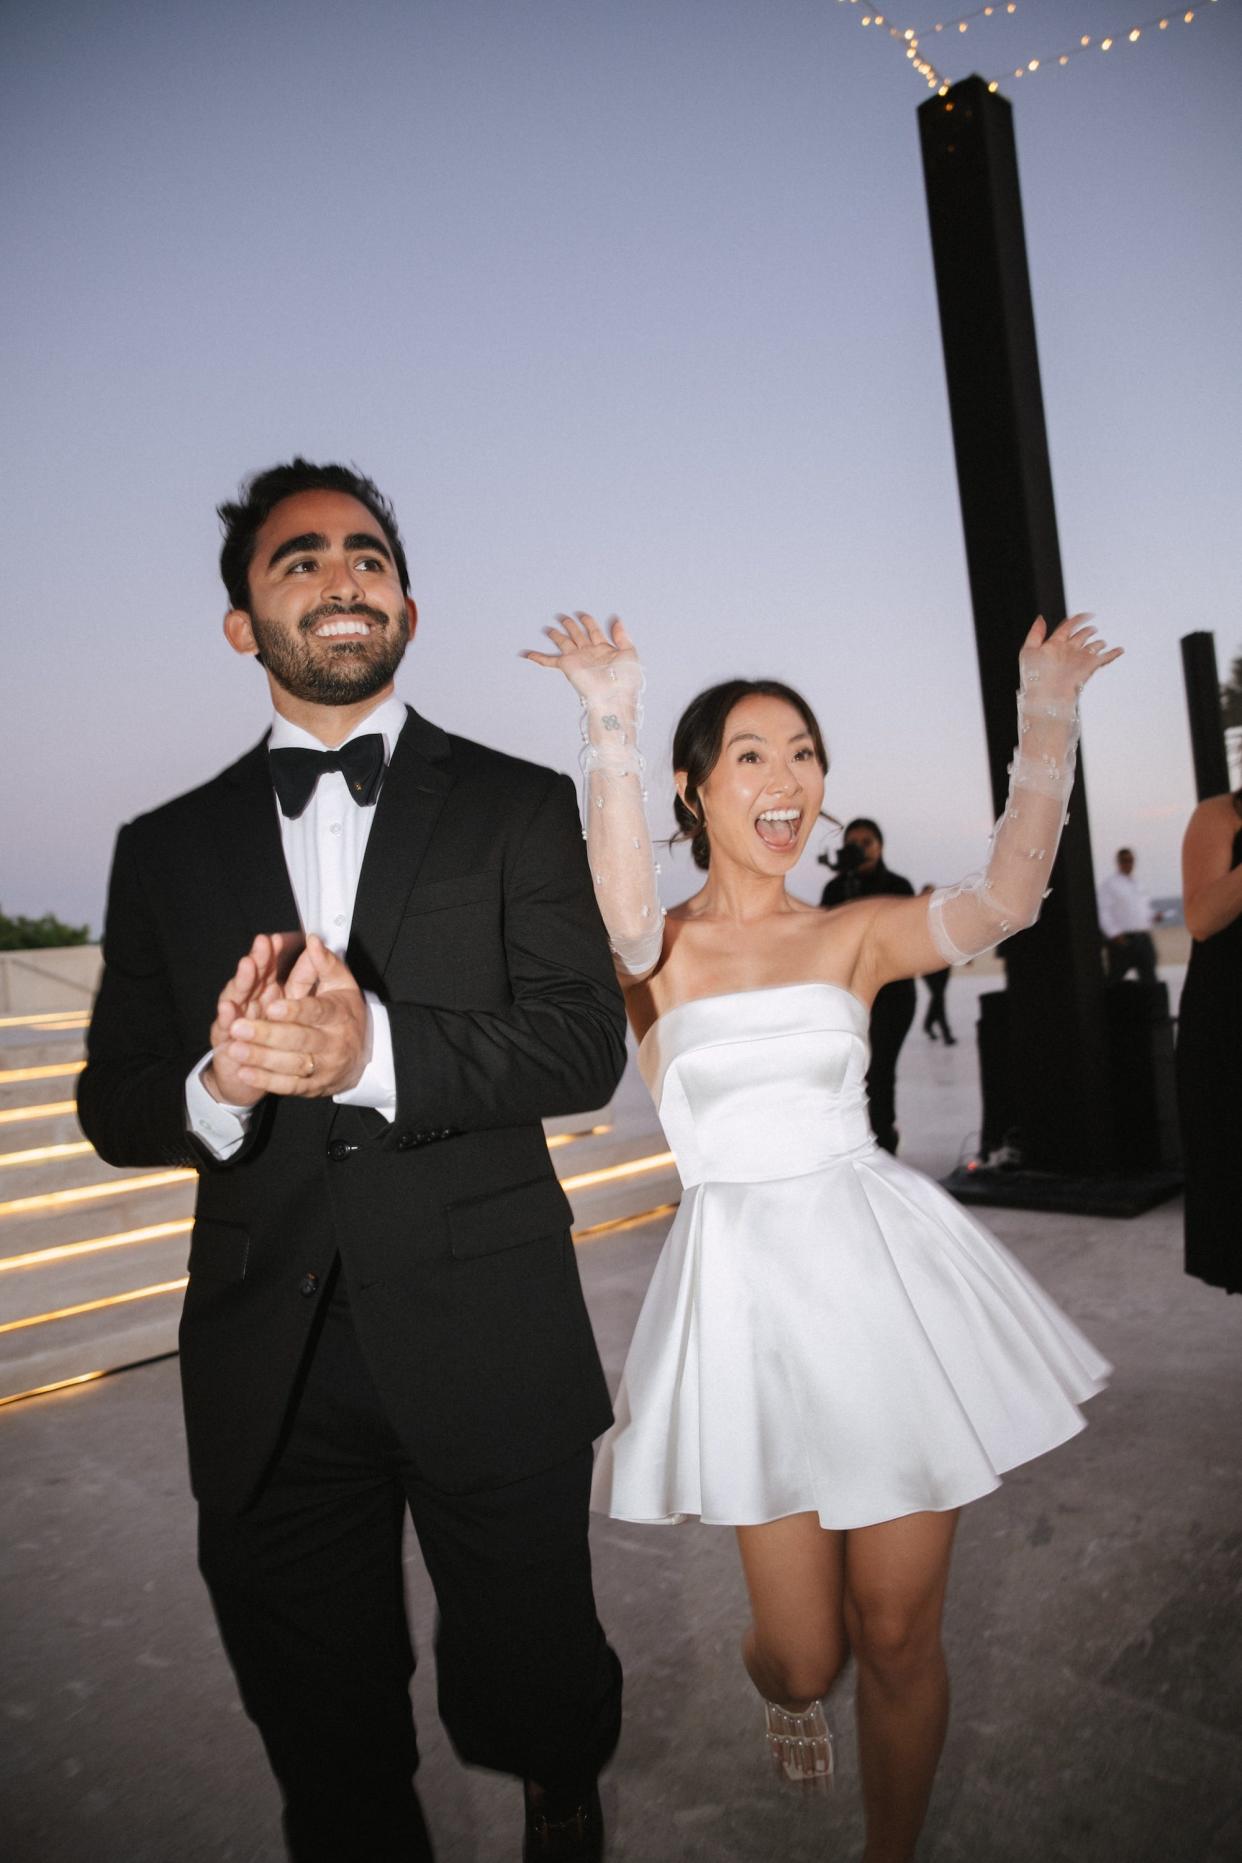 A bride and groom walk into their wedding reception. The bride waves in a shorter dress.